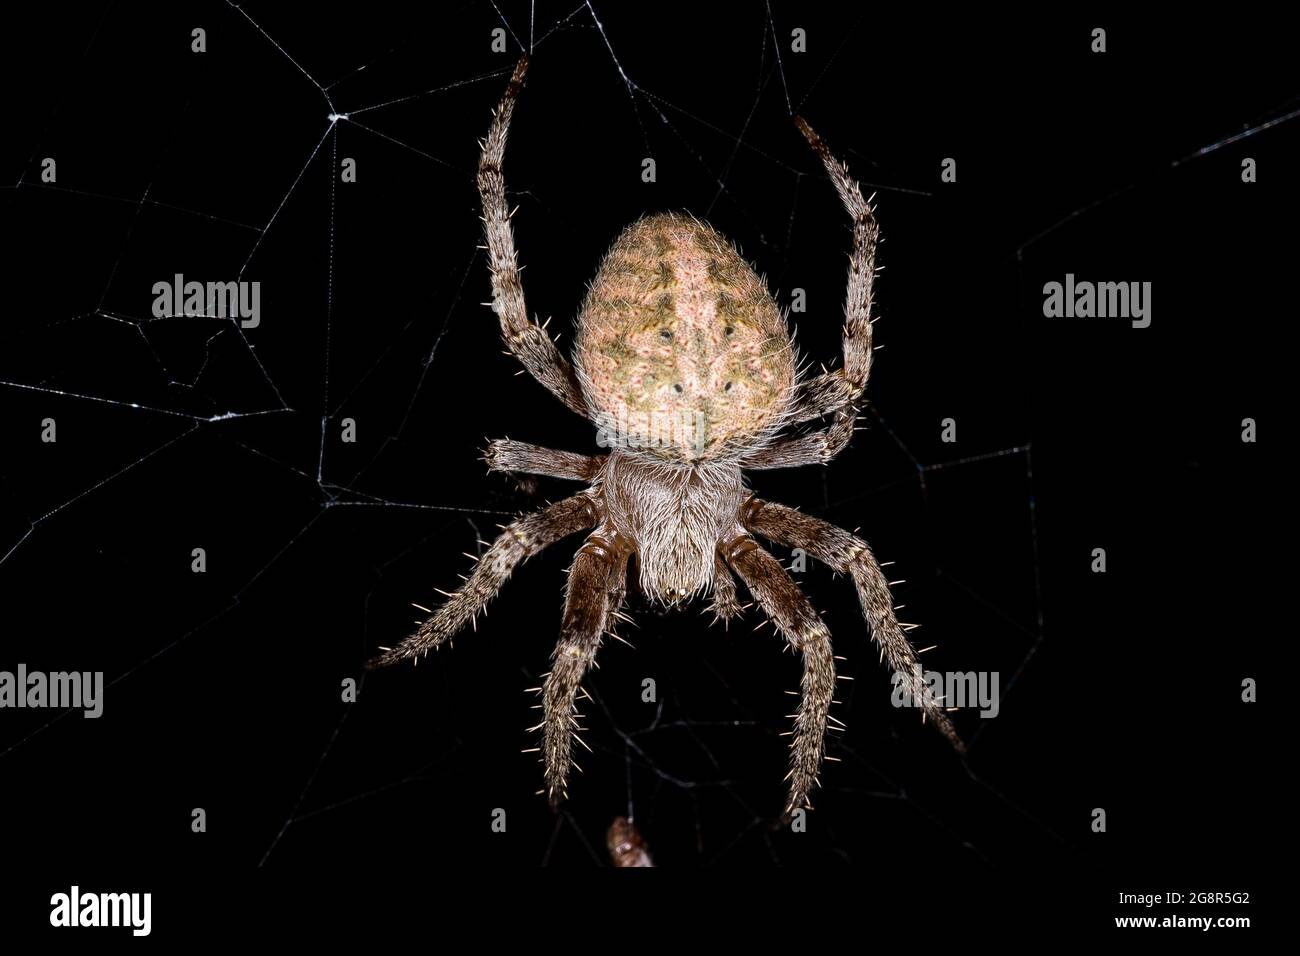 Neoscona crucifera is an orb-weaver spider in the family Araneidae. It is found in the United States from Maine to Florida in the east, to Minnesota i Stock Photo